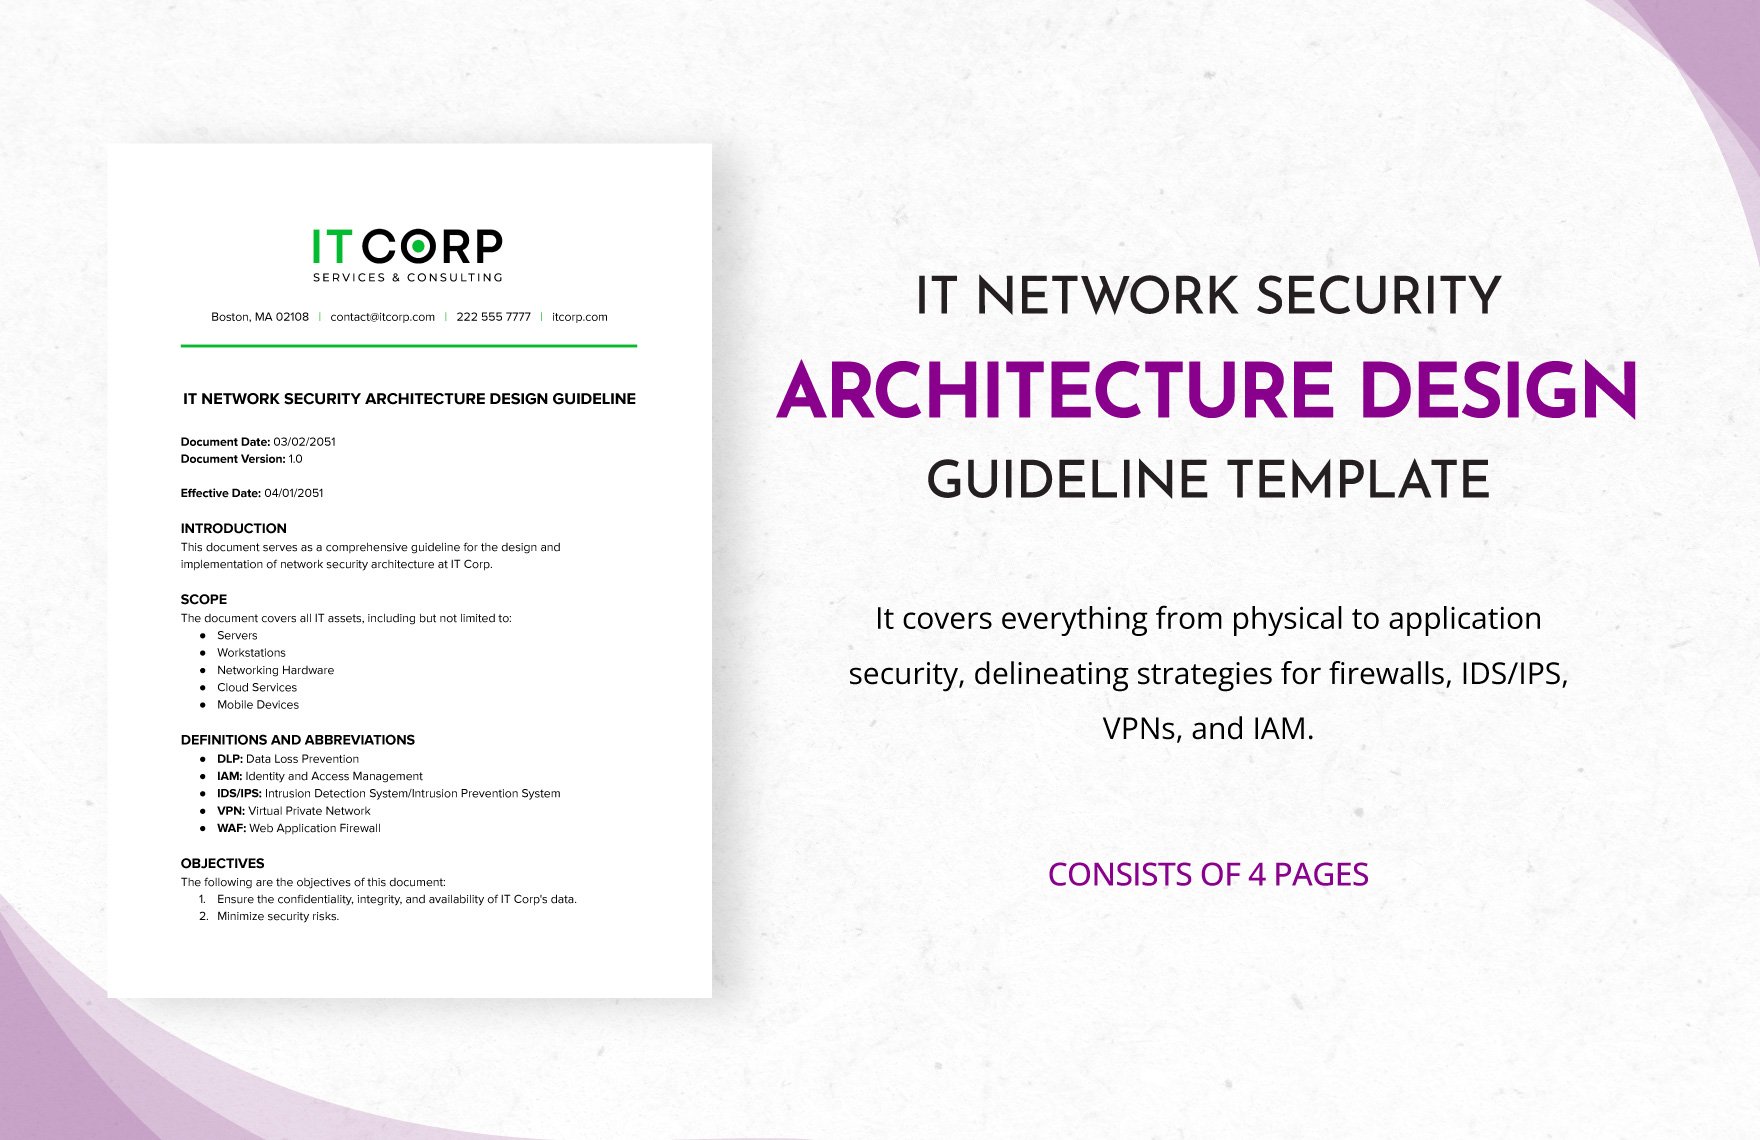 IT Network Security Architecture Design Guideline Template in Word, Google Docs, PDF